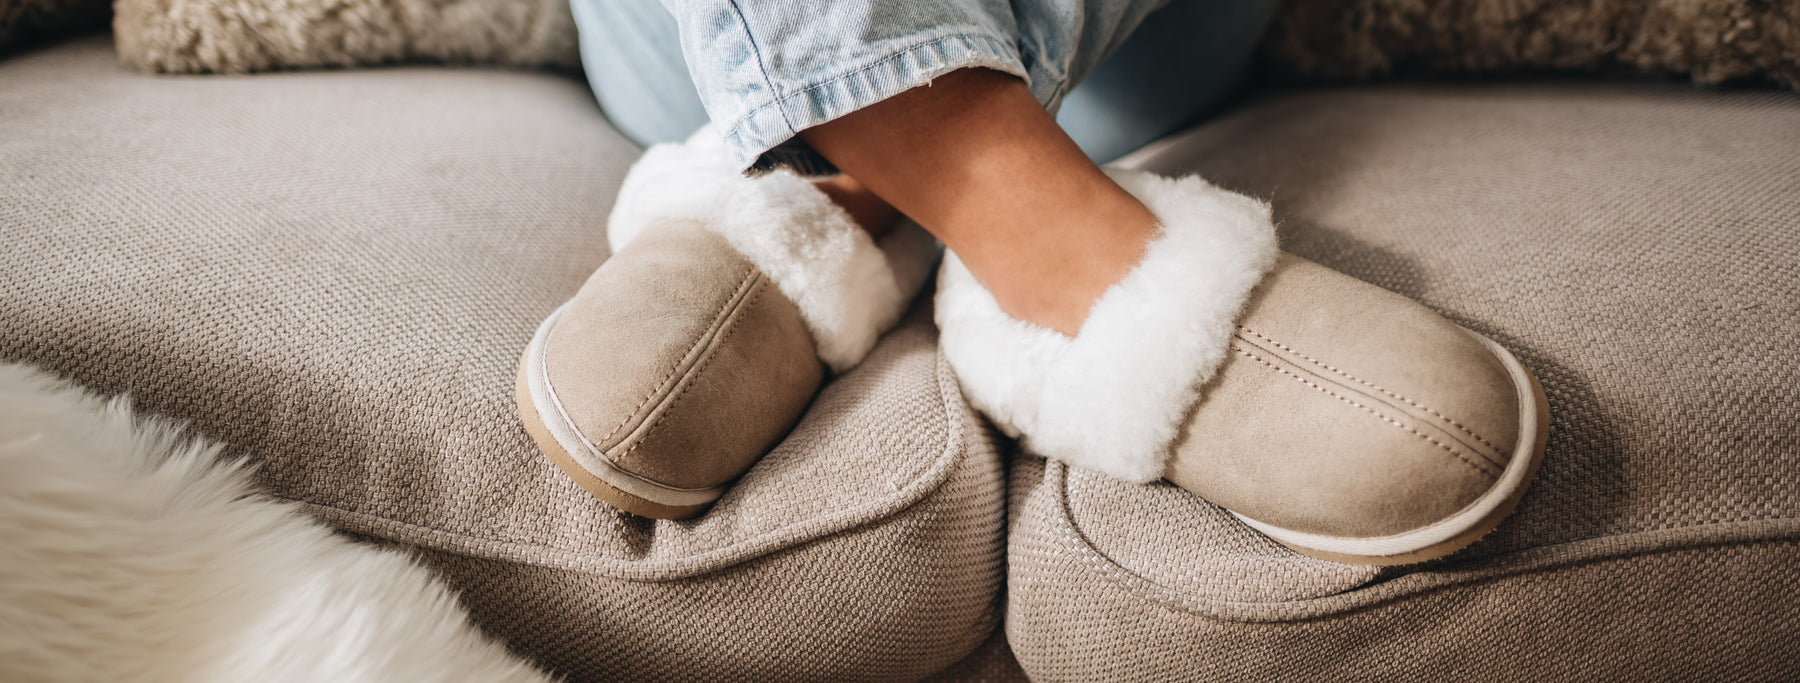 Is Sheepskin Warm? Explore the science behind the material with us!